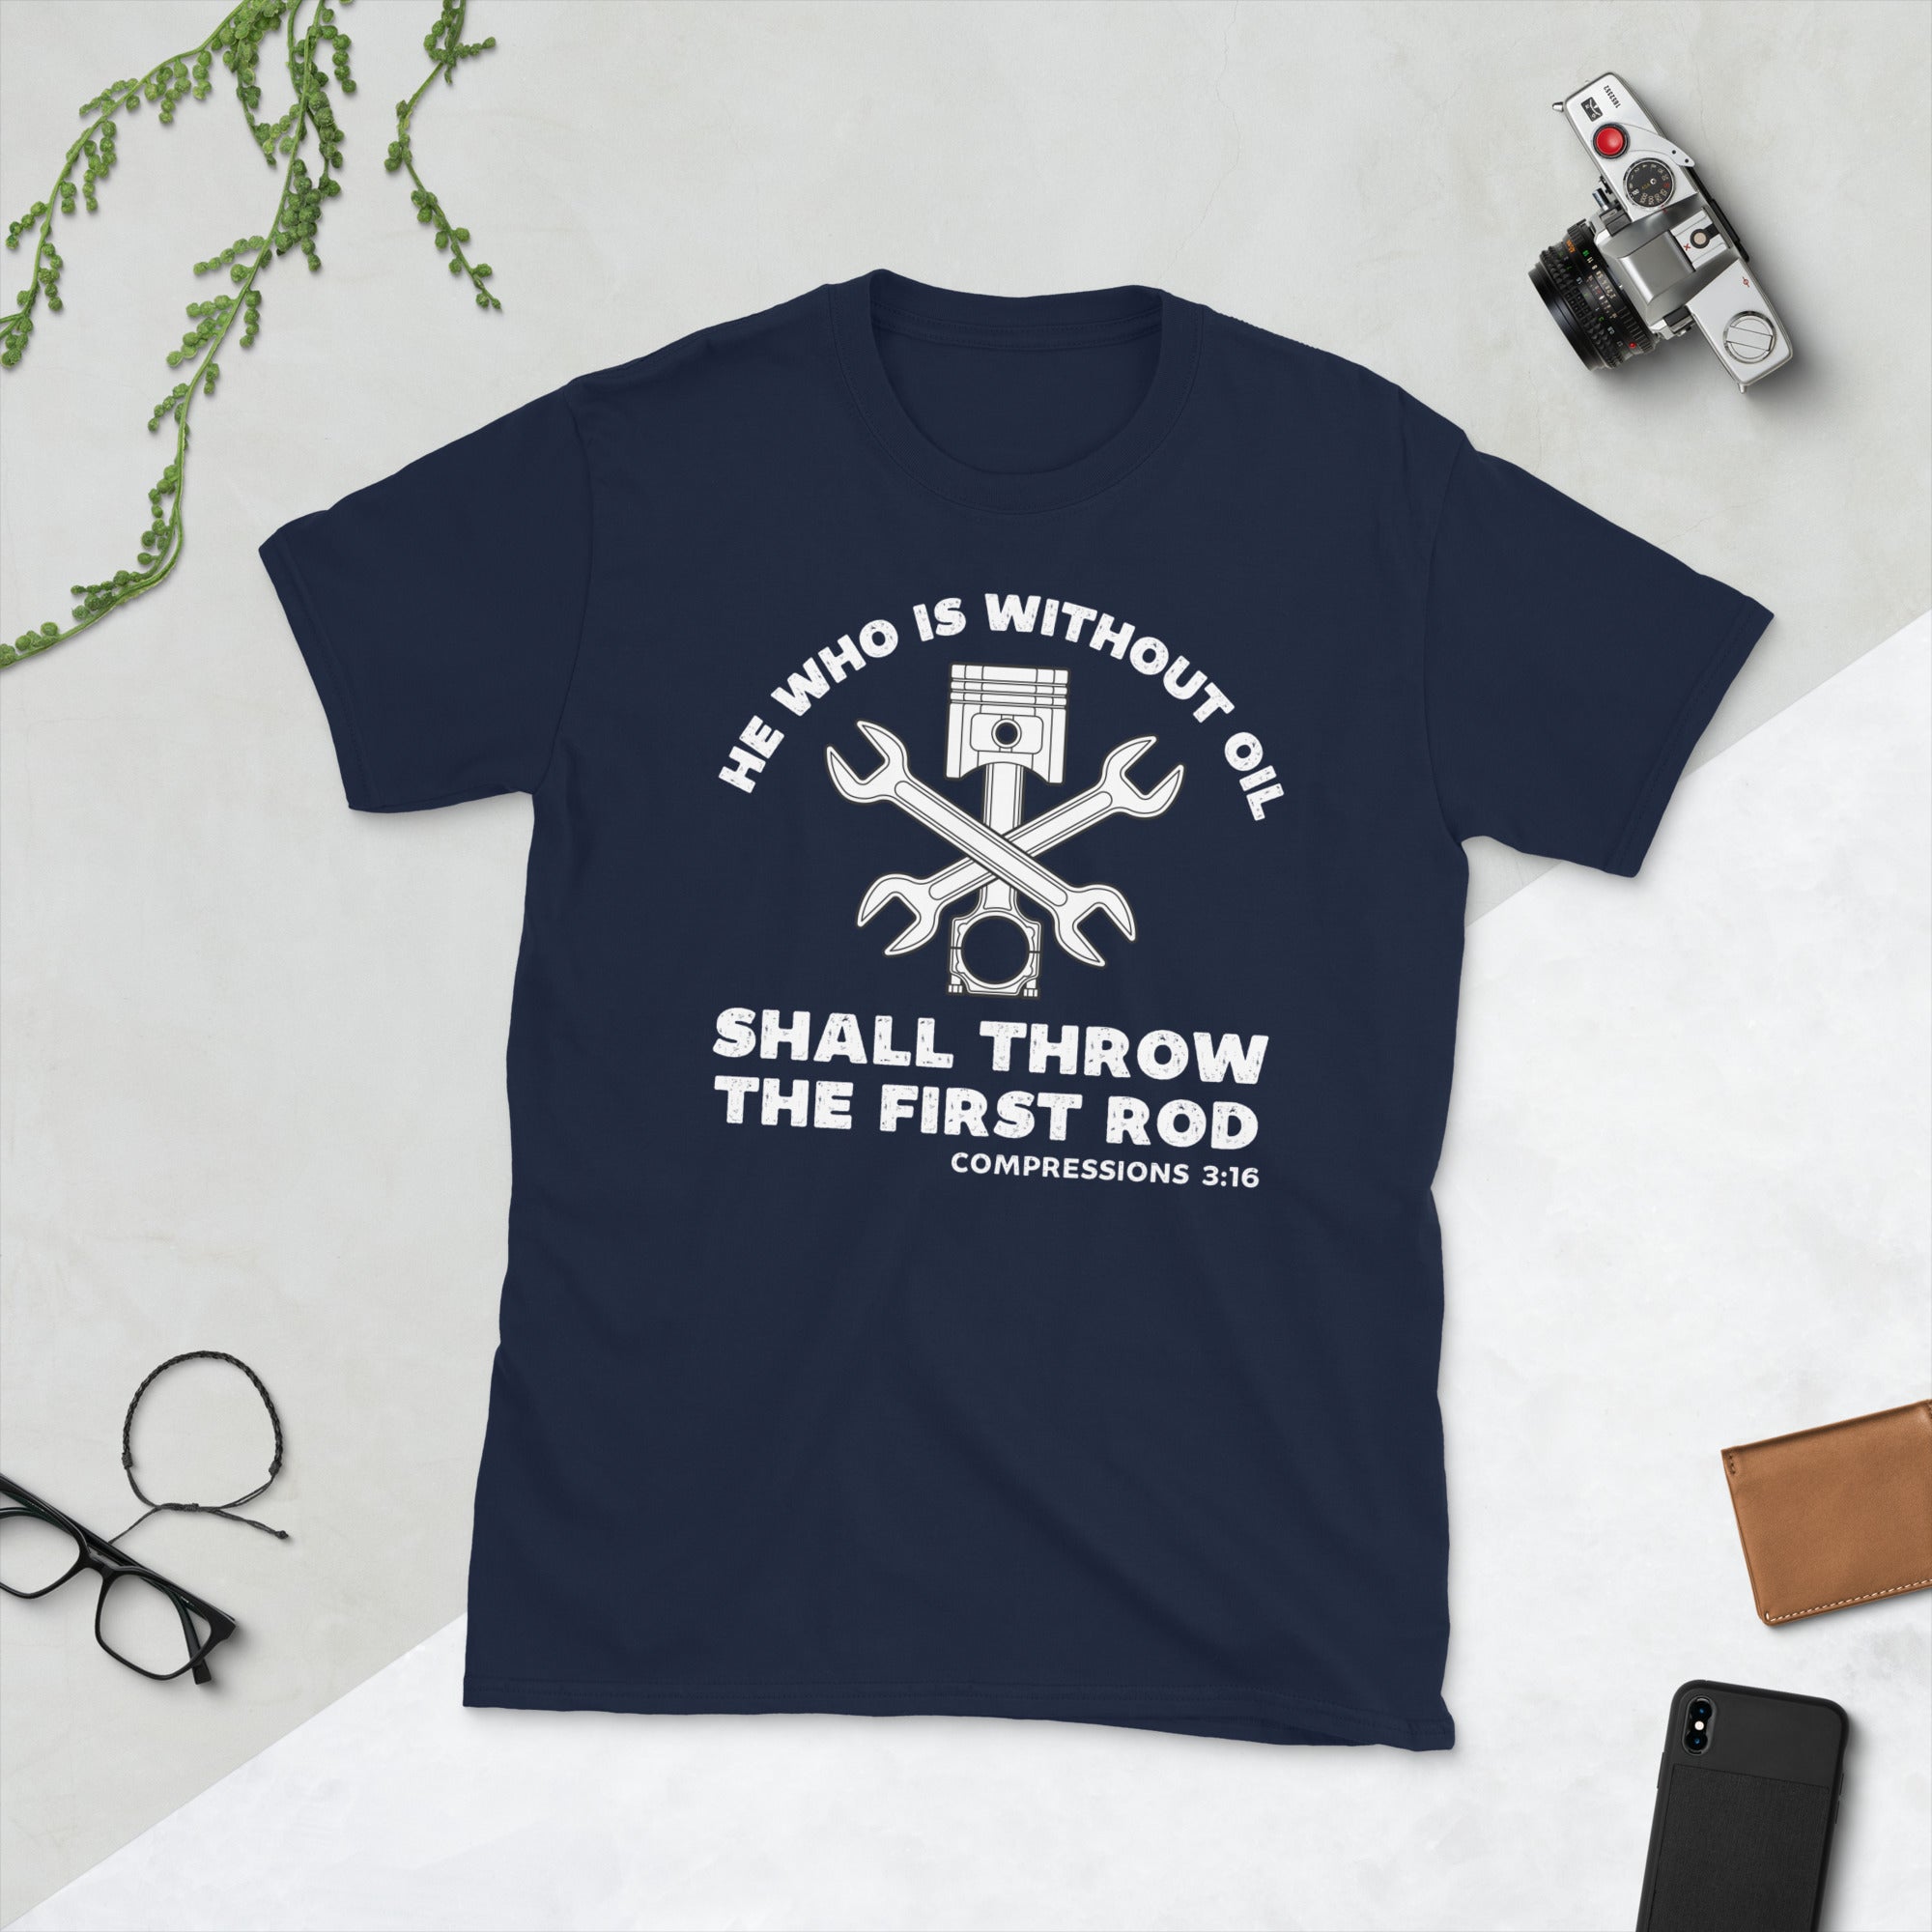 He Who Is Without Oil Shall Throw The First Rod, Car Mechanic Shirt, Funny Mechanic Gifts, Diesel Mechanic, Engineer Dad Tshirt - Madeinsea©